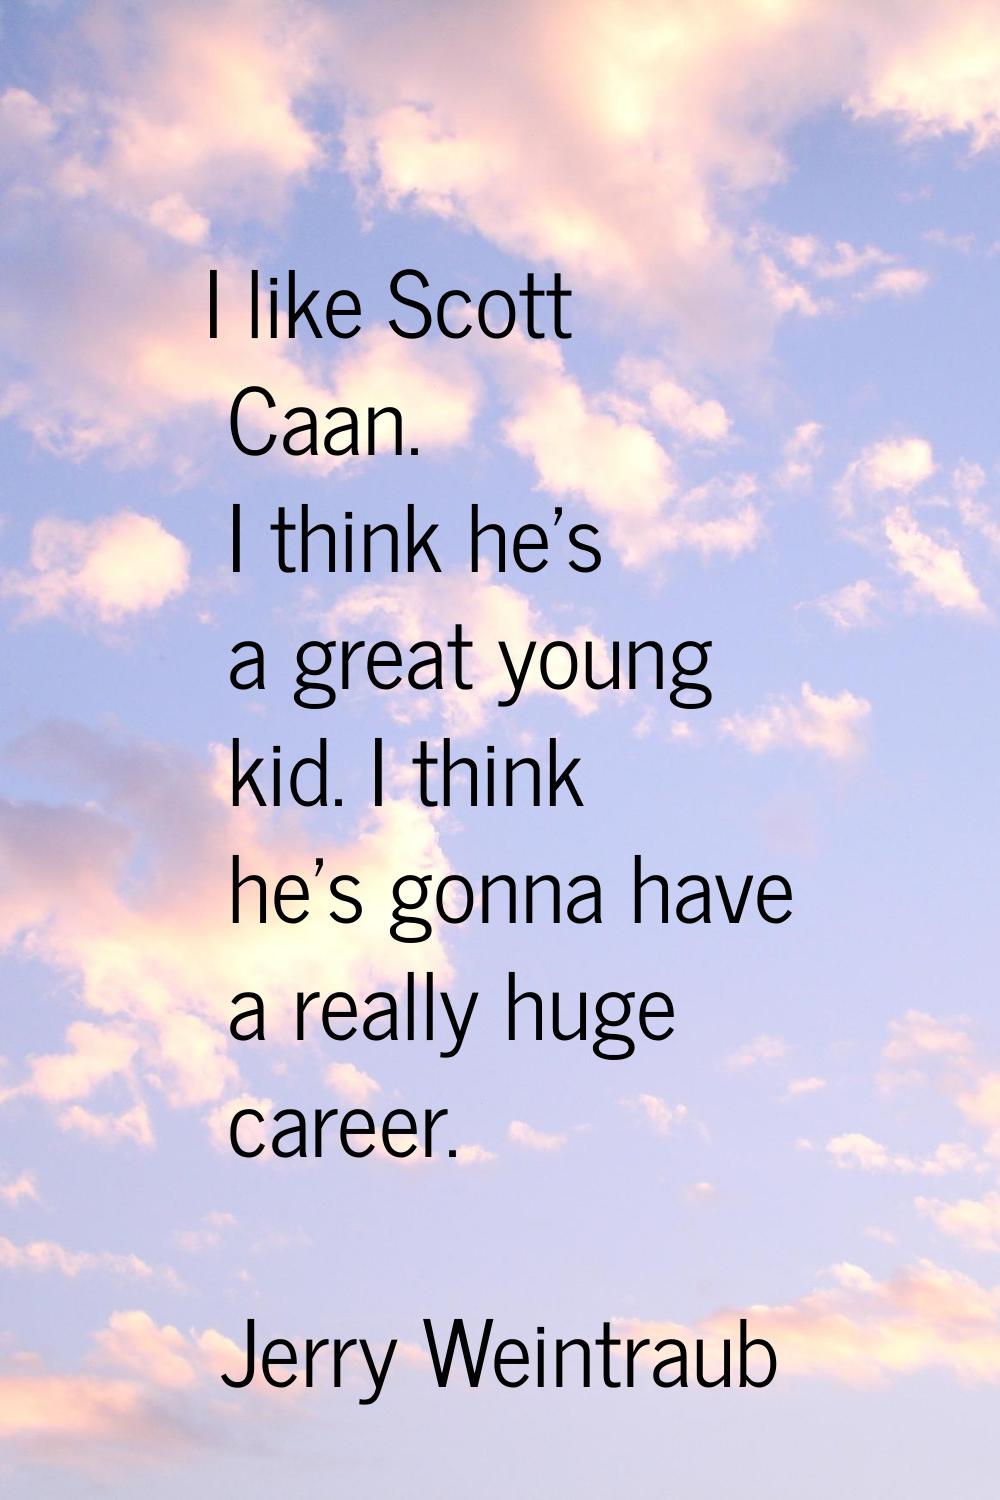 I like Scott Caan. I think he's a great young kid. I think he's gonna have a really huge career.